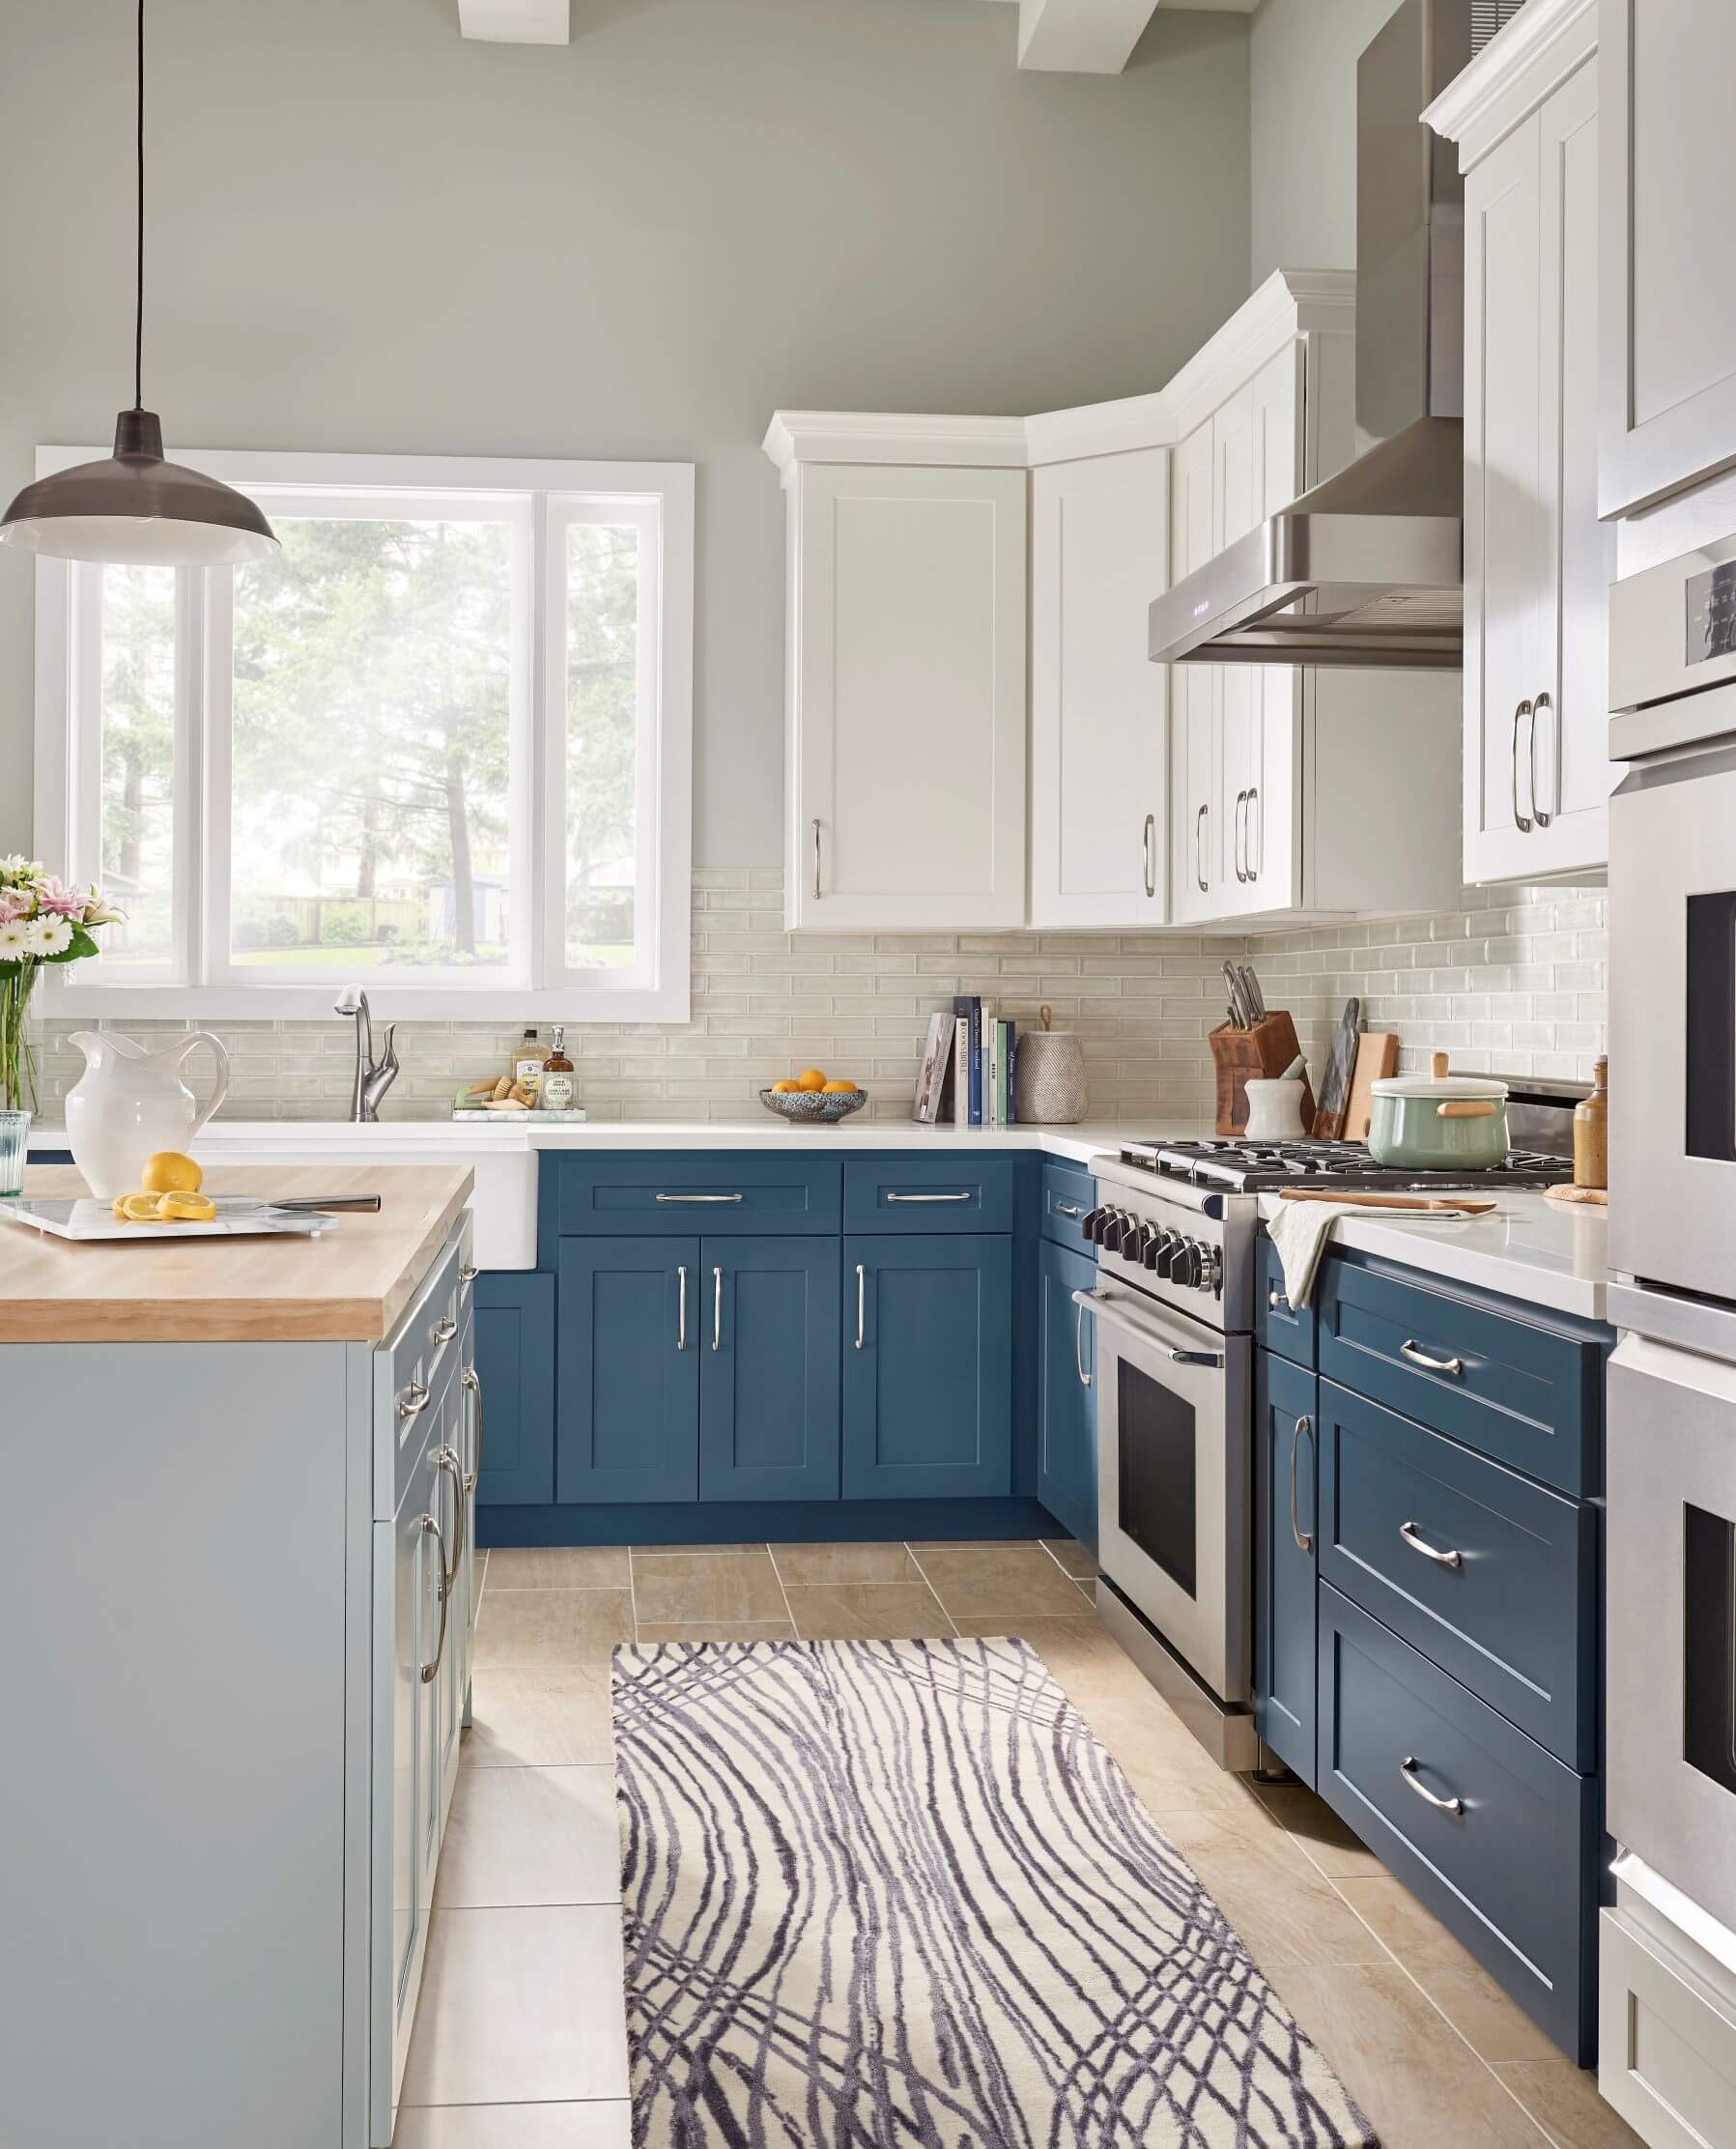 East Coast Quick Kitchen Cabinets come in a variety of colors